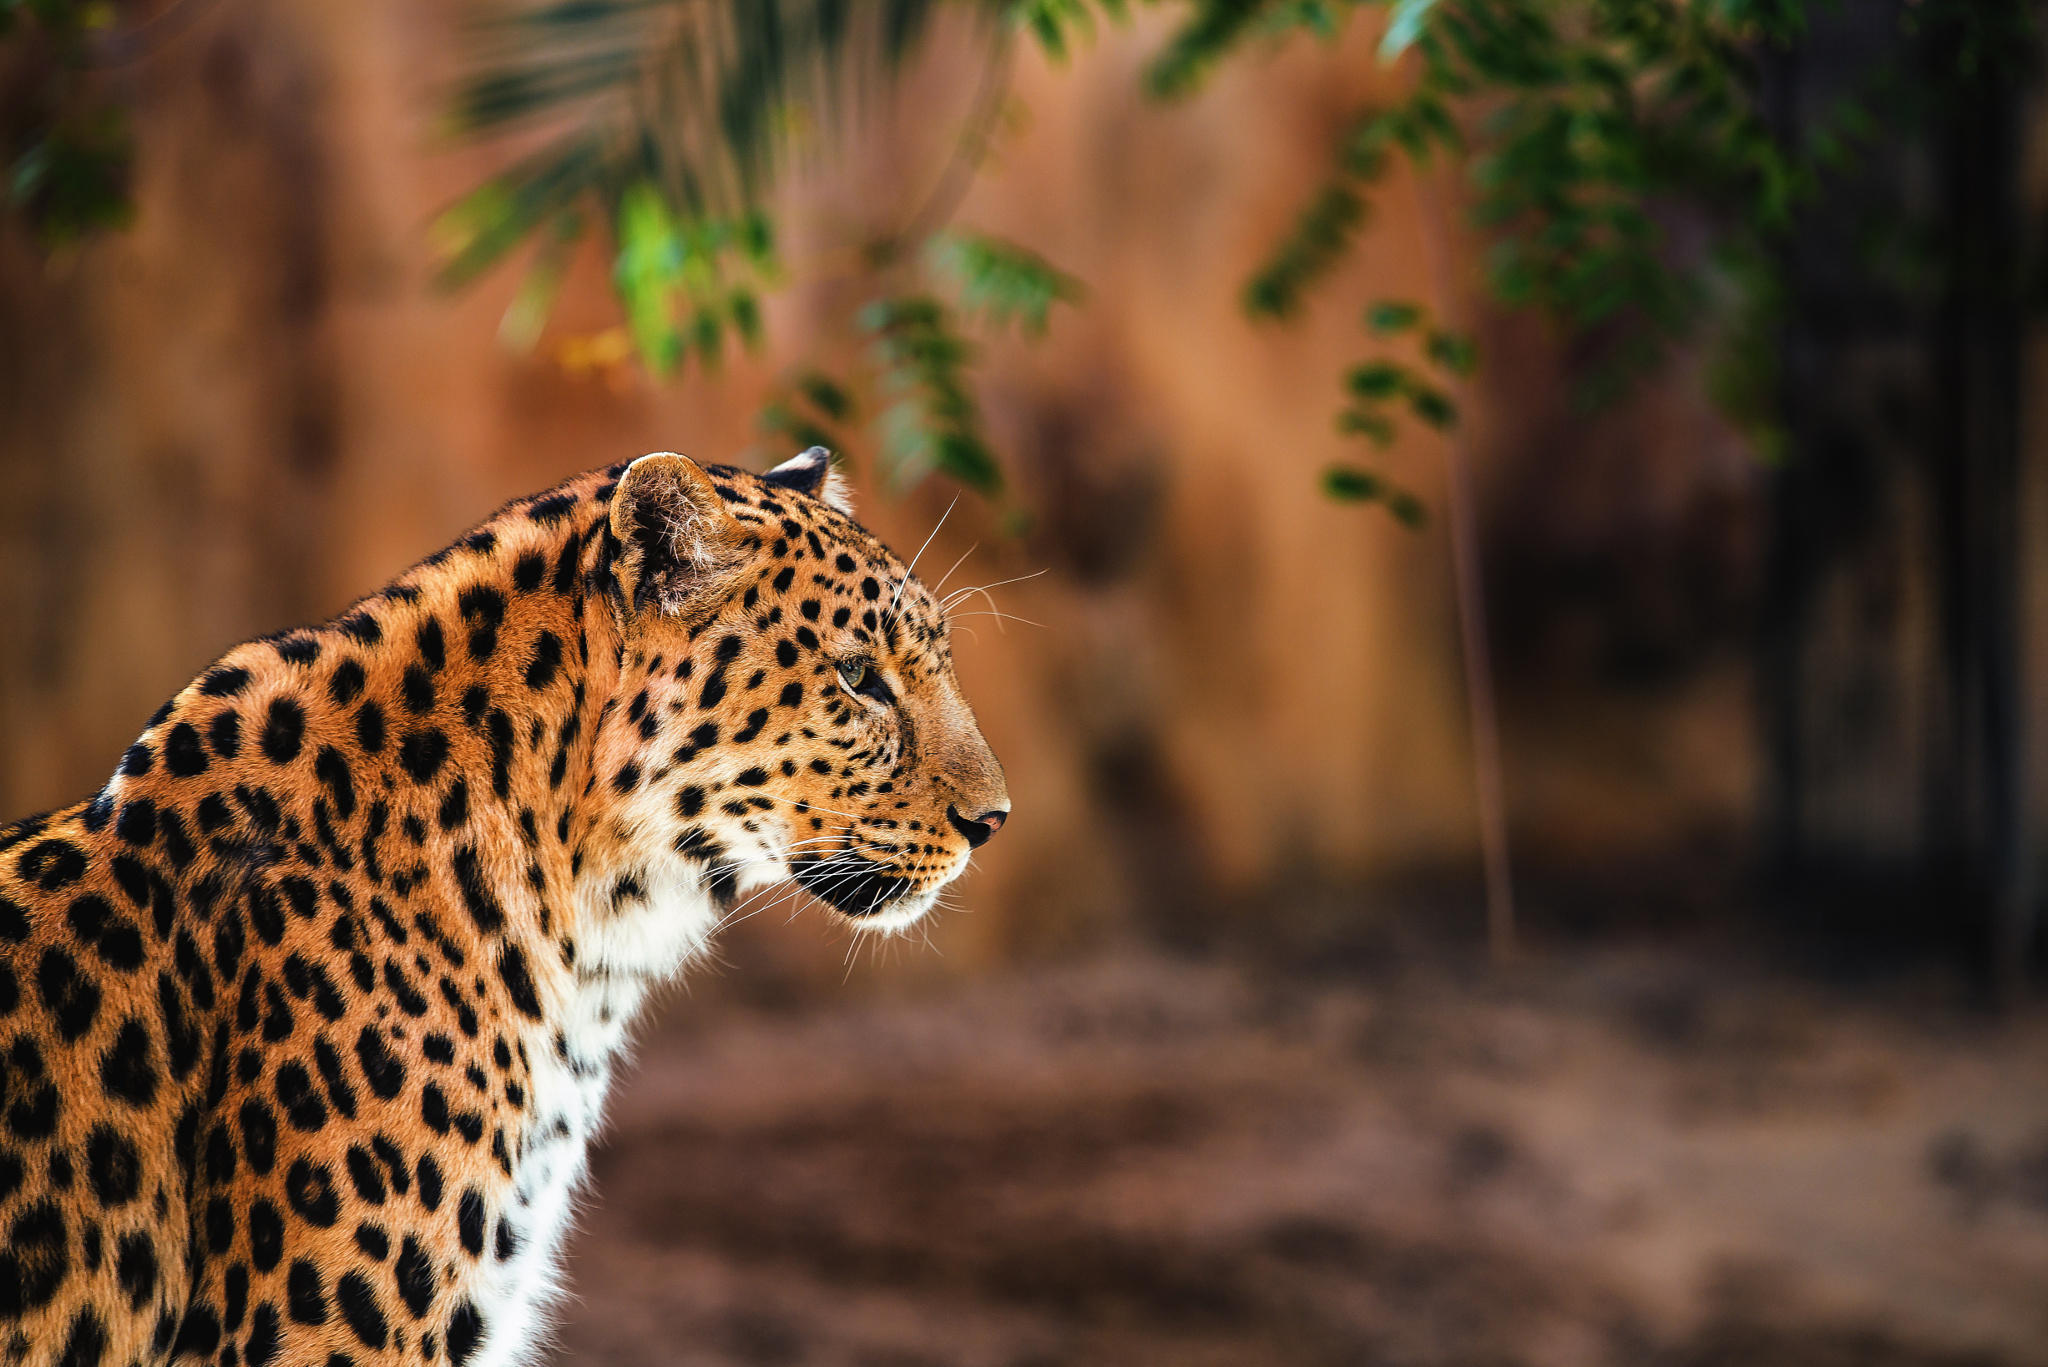 Leopard in the Light